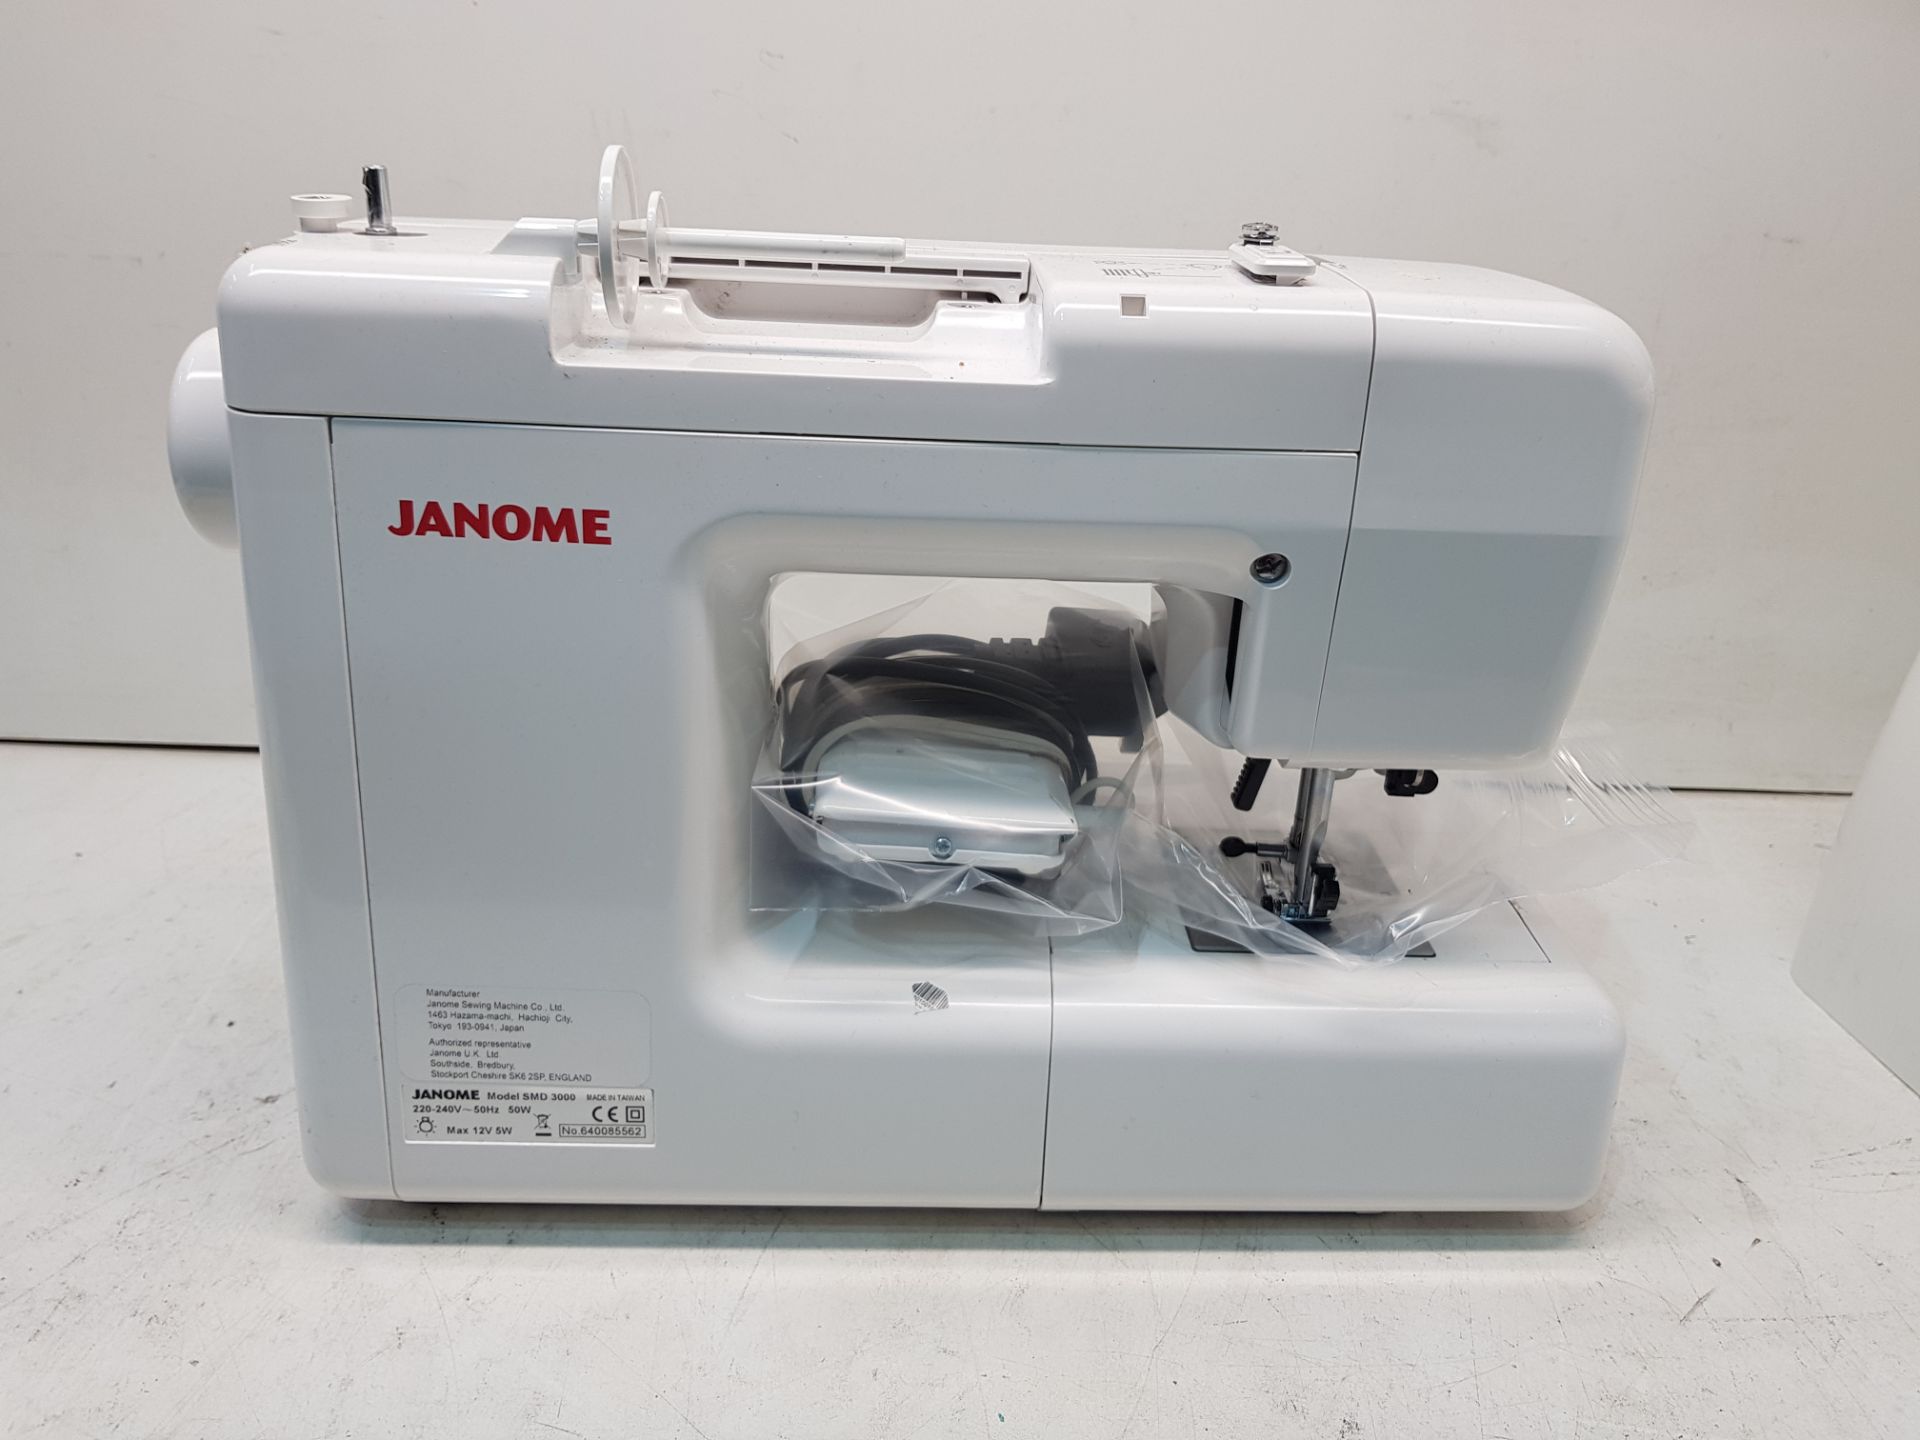 Janome SMD 3000 Sewing Machine S/N: 640085562 - Image 4 of 4